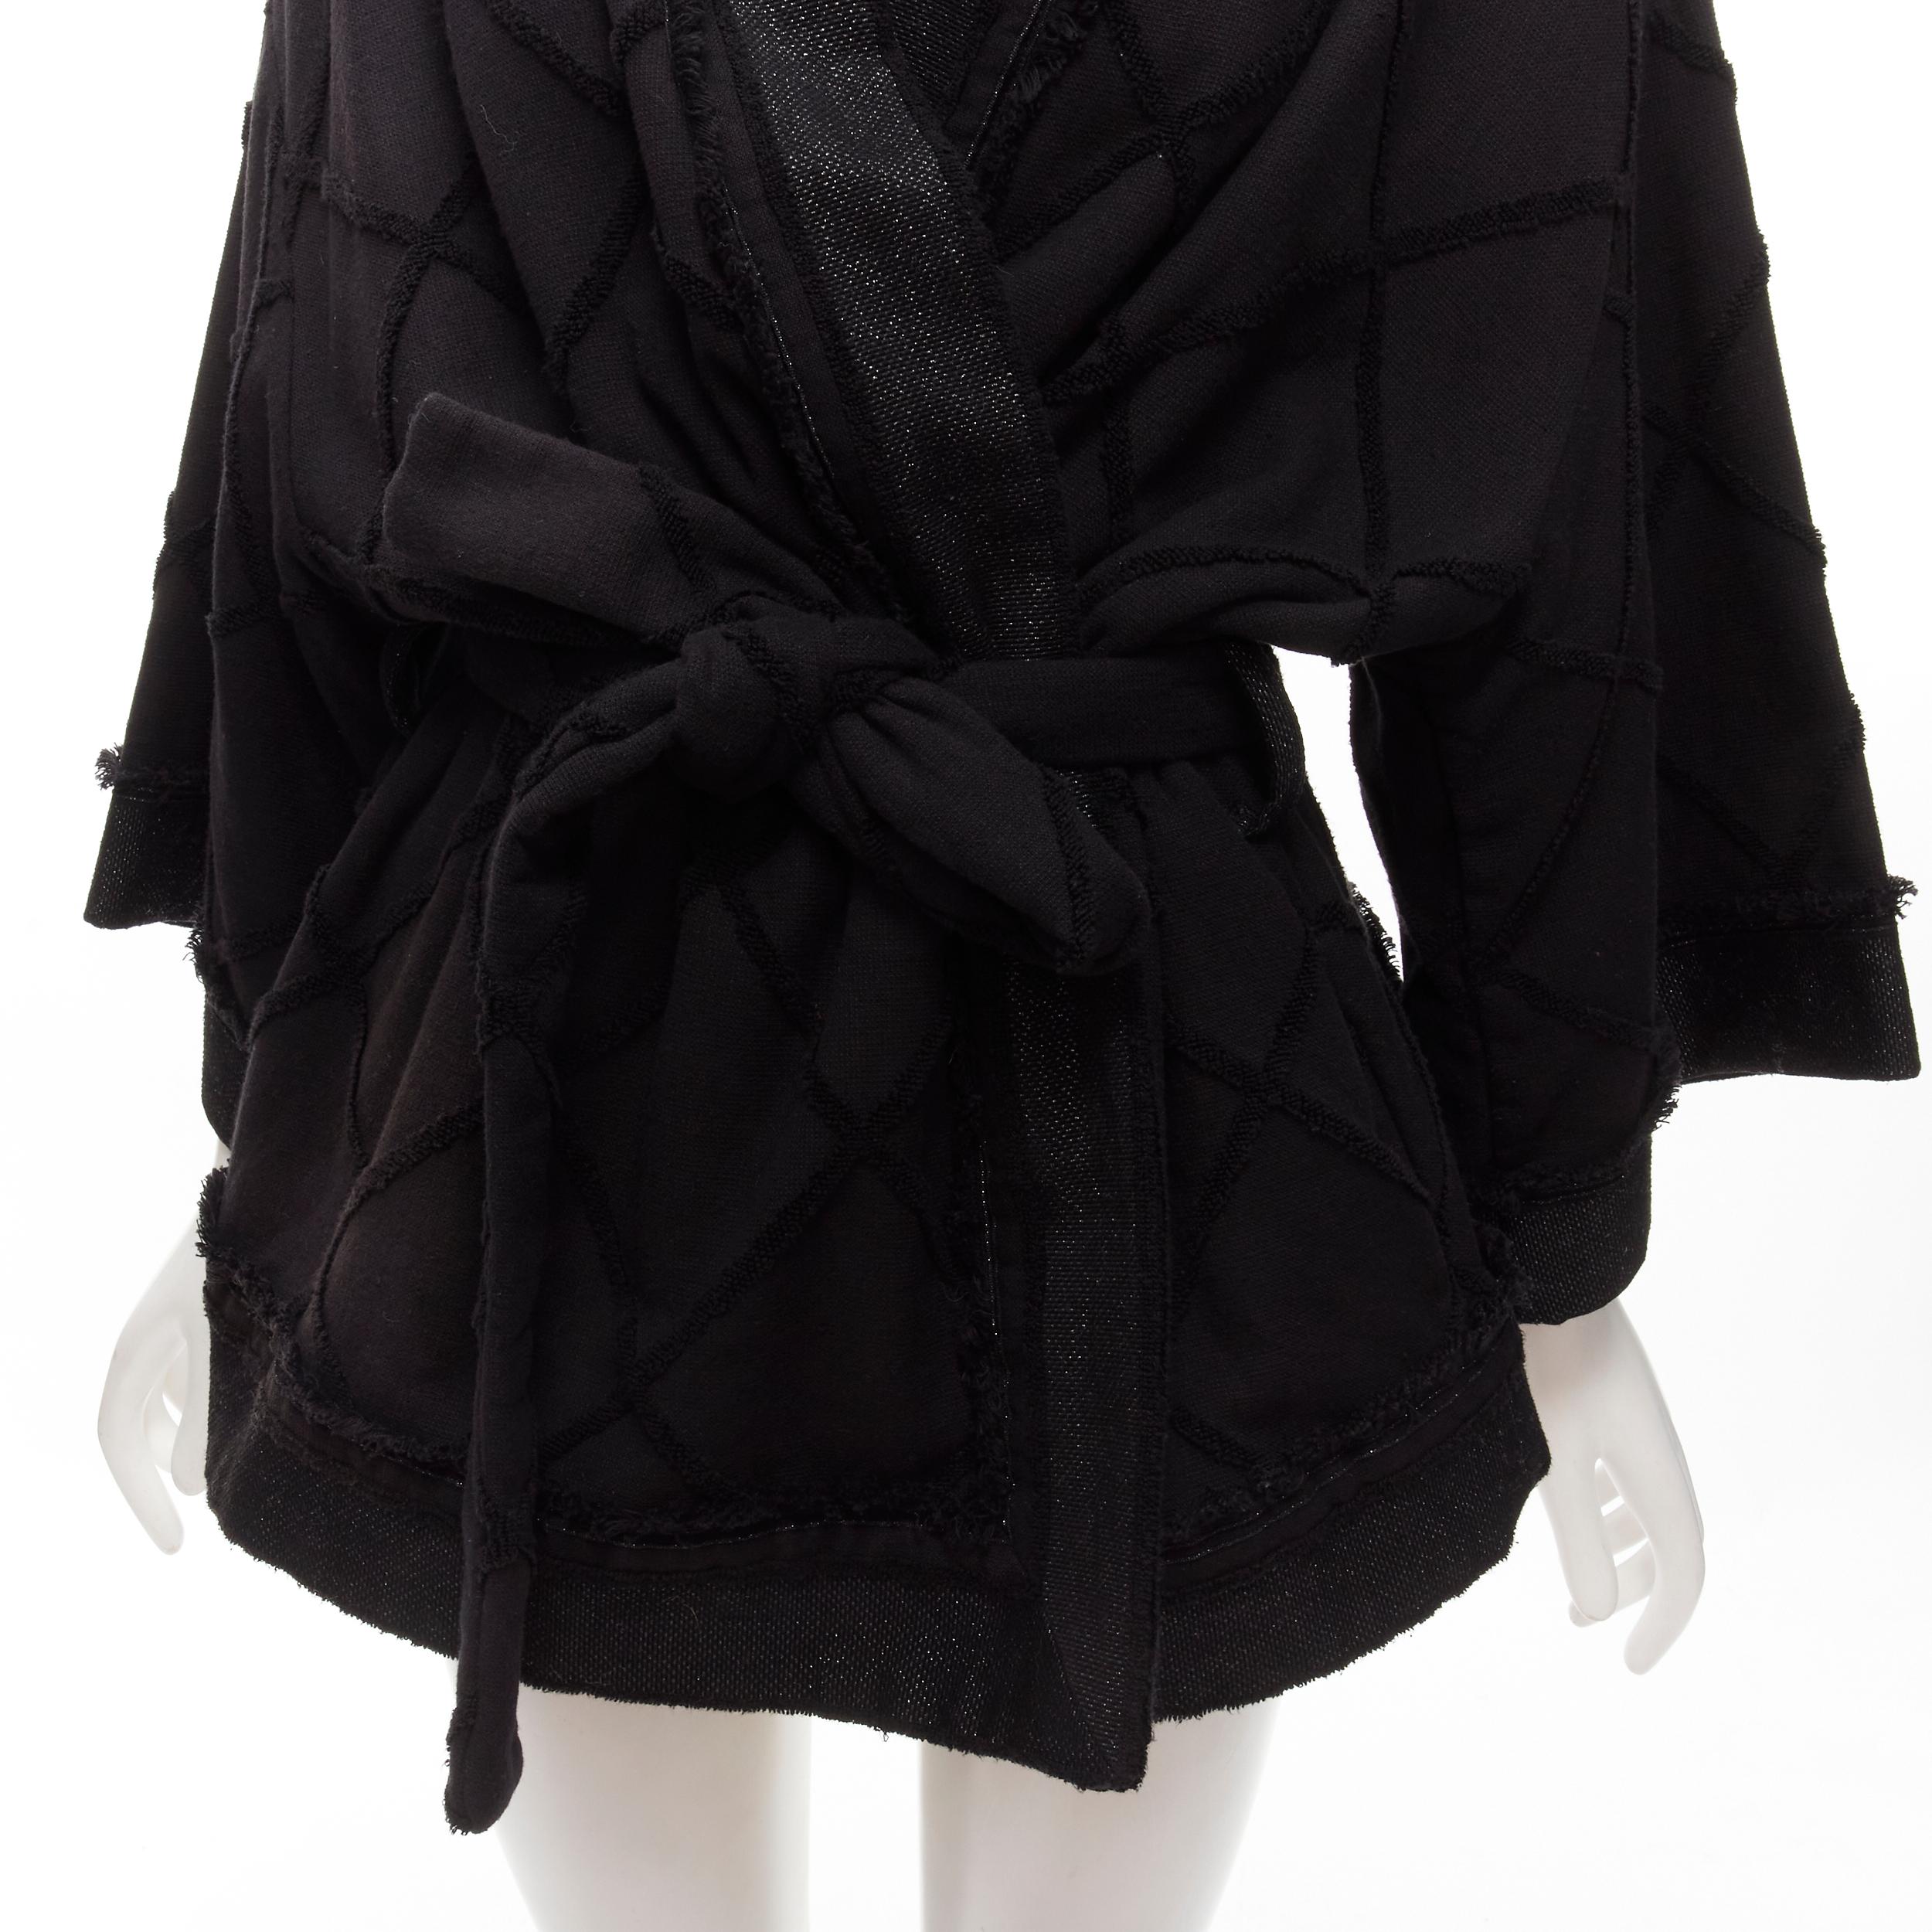 CHANEL 15A Karl Gabrielle Brasserie CC black diamond terrycloth tweed robe FR38
Reference: TGAS/C01863
Brand: Chanel
Designer: Karl Lagerfeld
Collection: 15A
Material: Cotton, Polyester
Color: Black
Pattern: Solid
Closure: Belt
Extra Details: CC